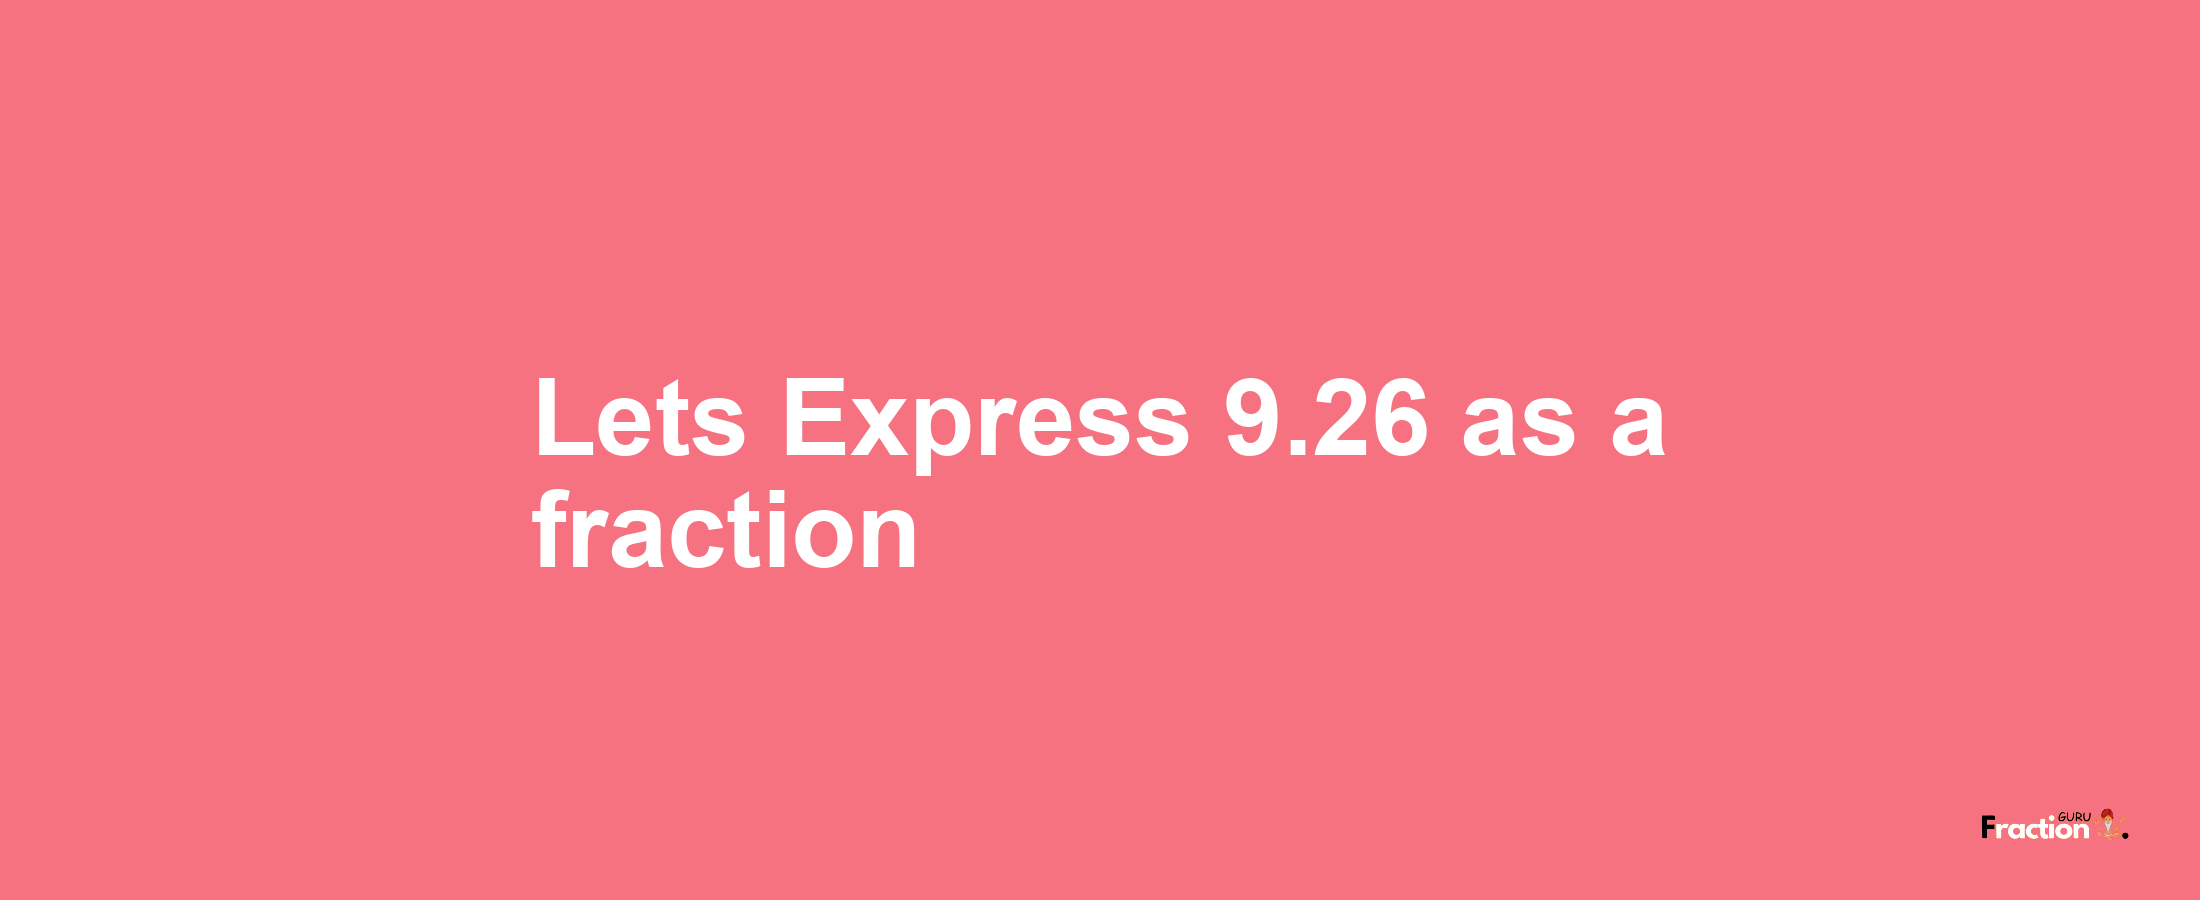 Lets Express 9.26 as afraction